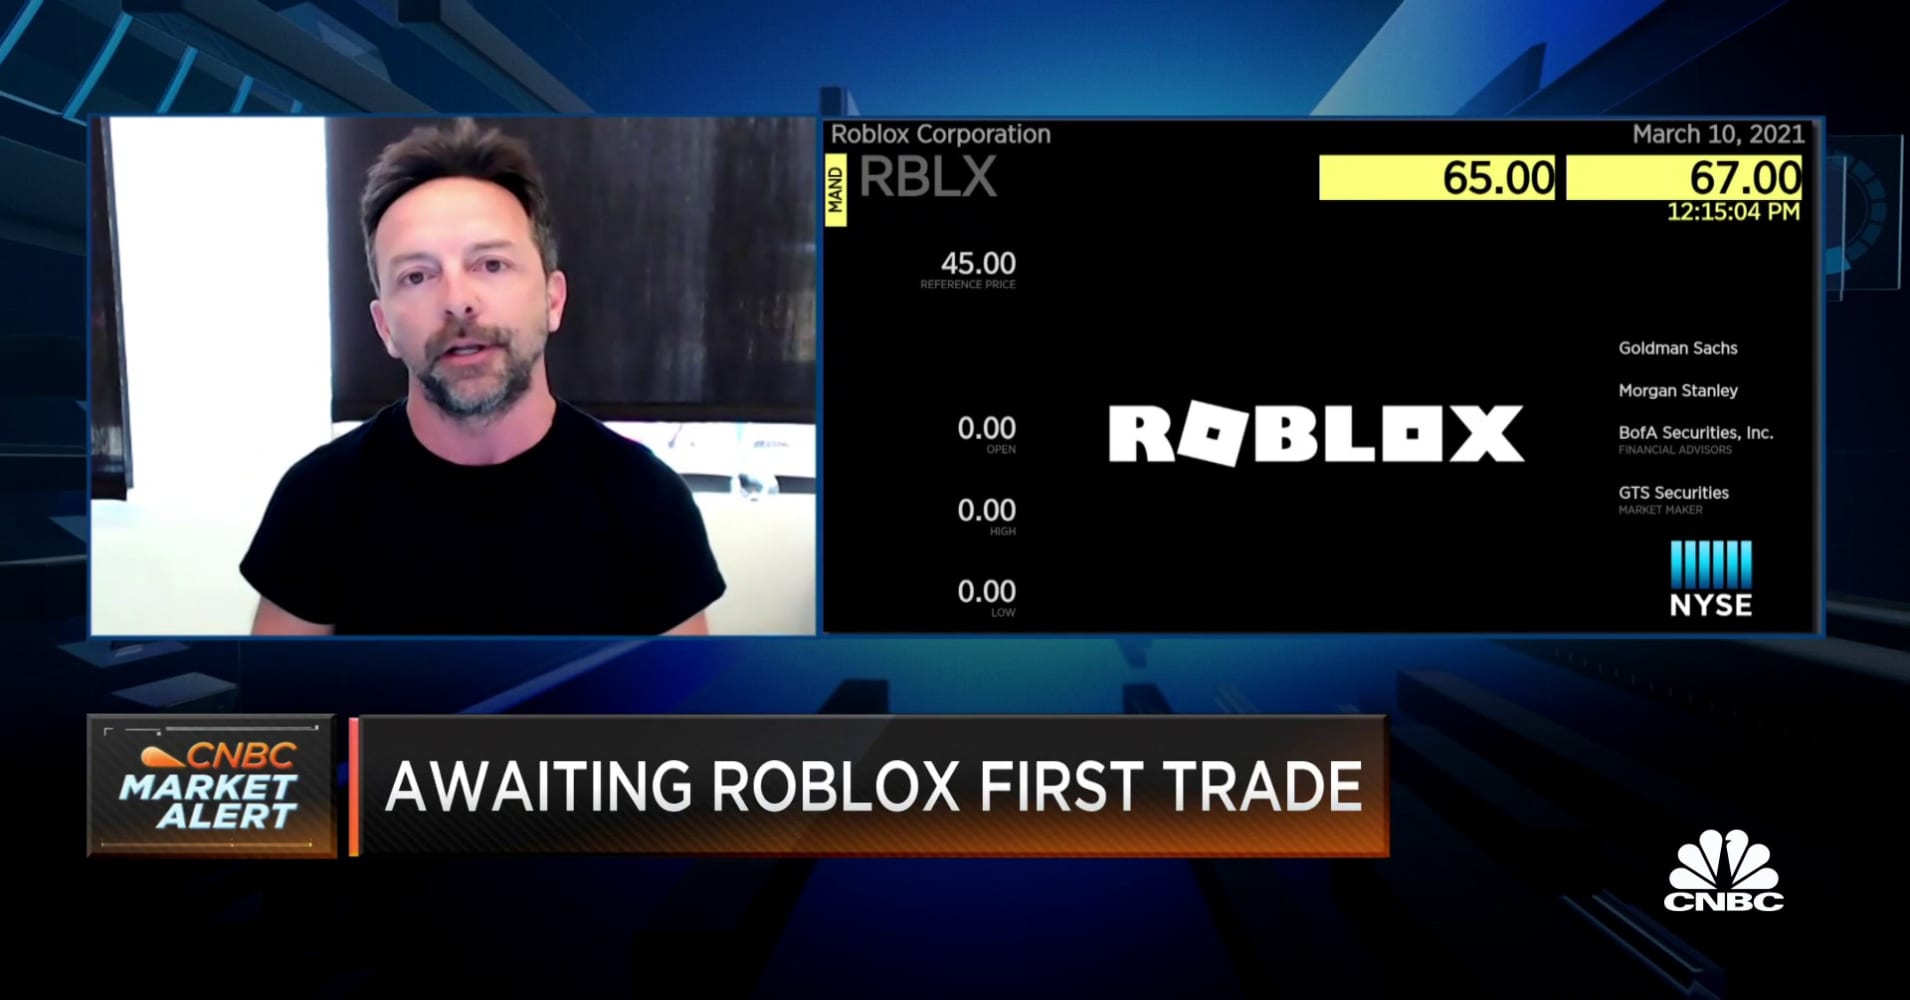 Roblox Rblx Goes Public With A Bet On The Metaverse - most robux ever